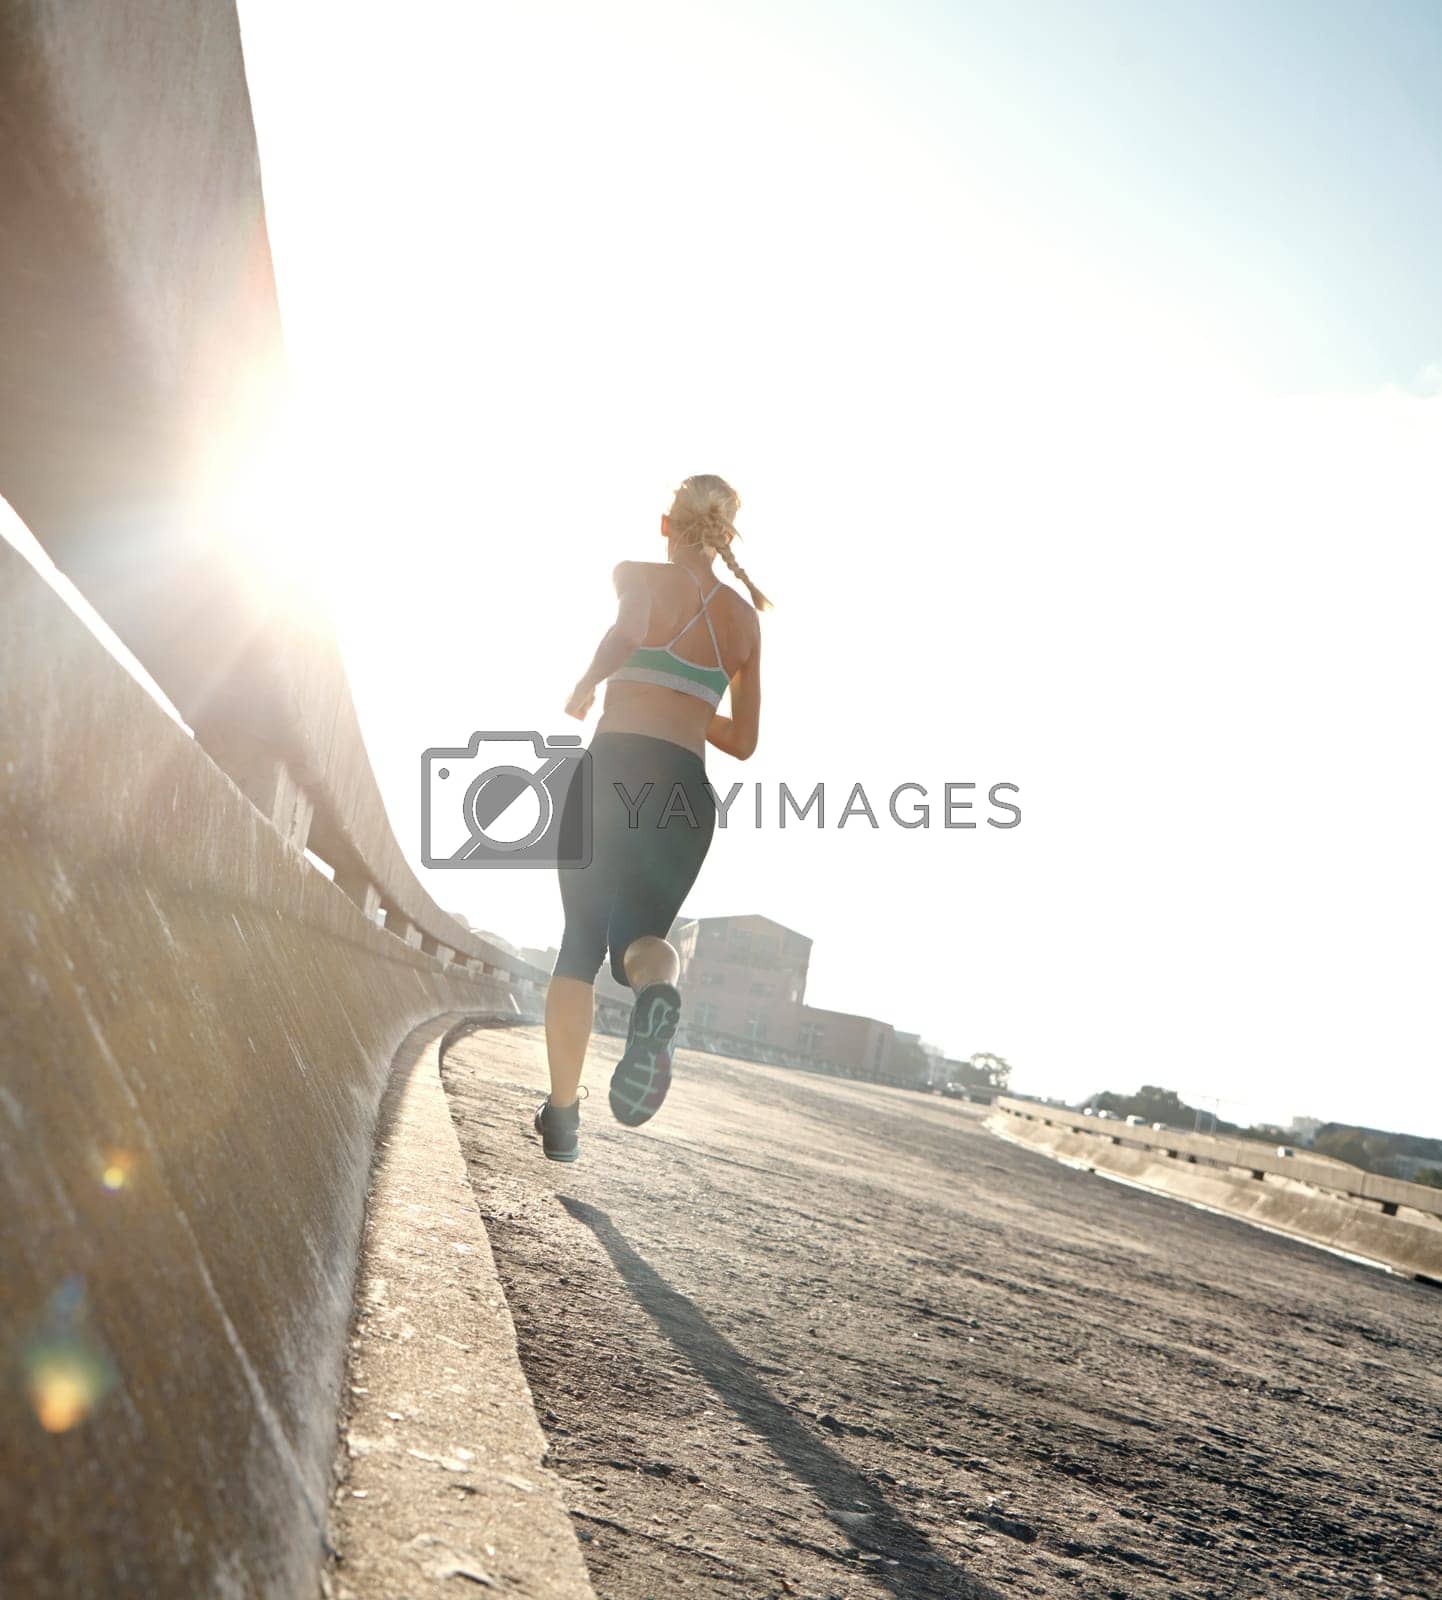 Royalty free image of Theres always further to go. Rear view shot of a young woman on her morning run. by YuriArcurs